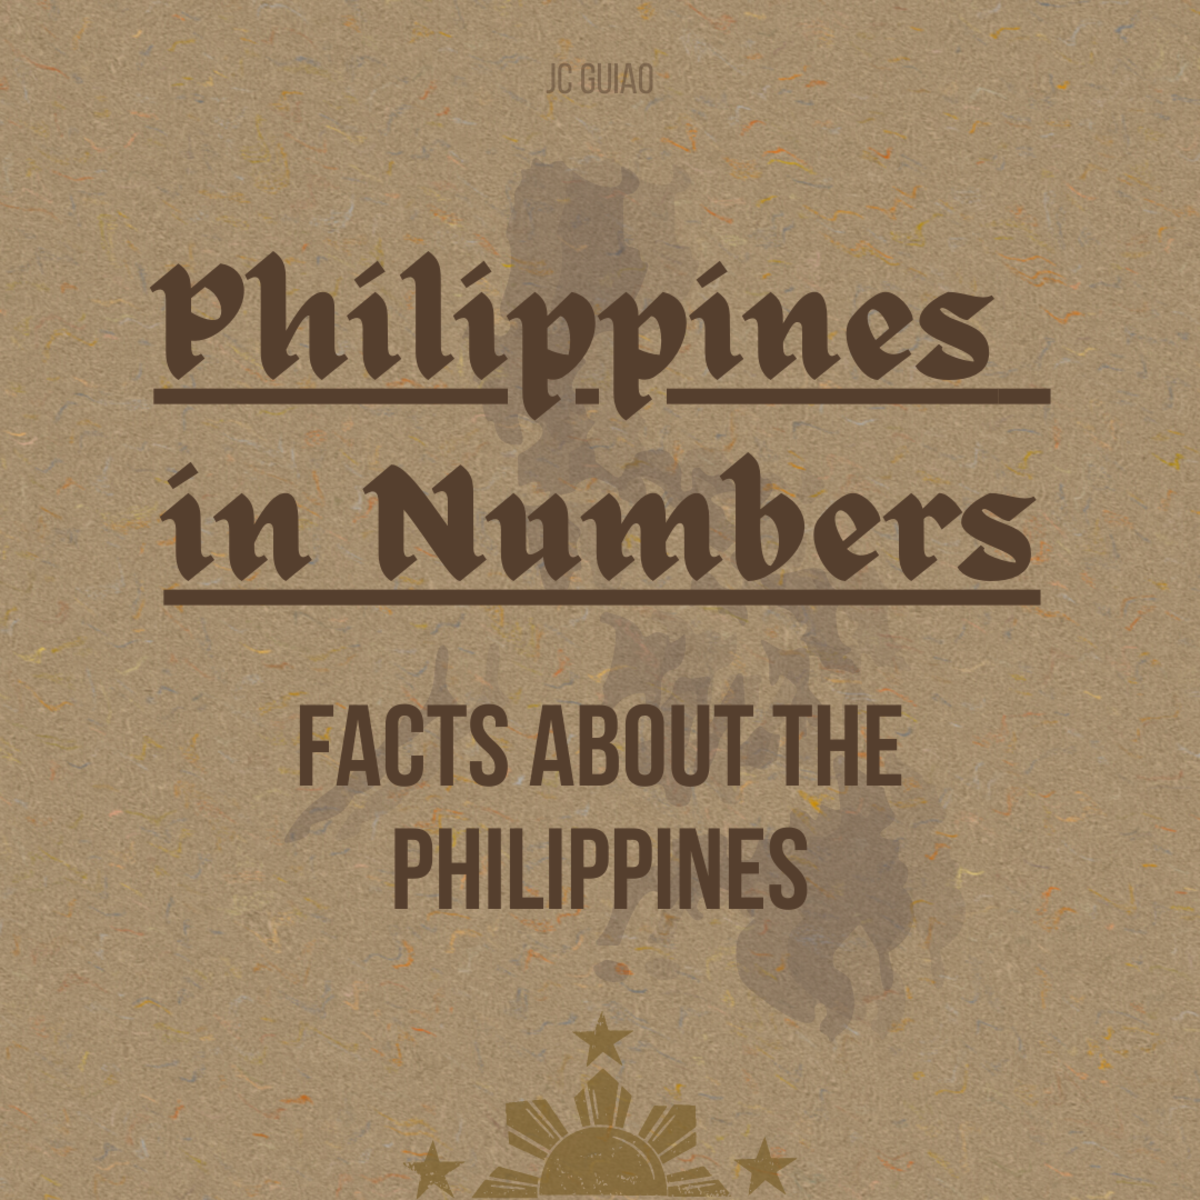 philippines-in-numbers-facts-about-the-philippines